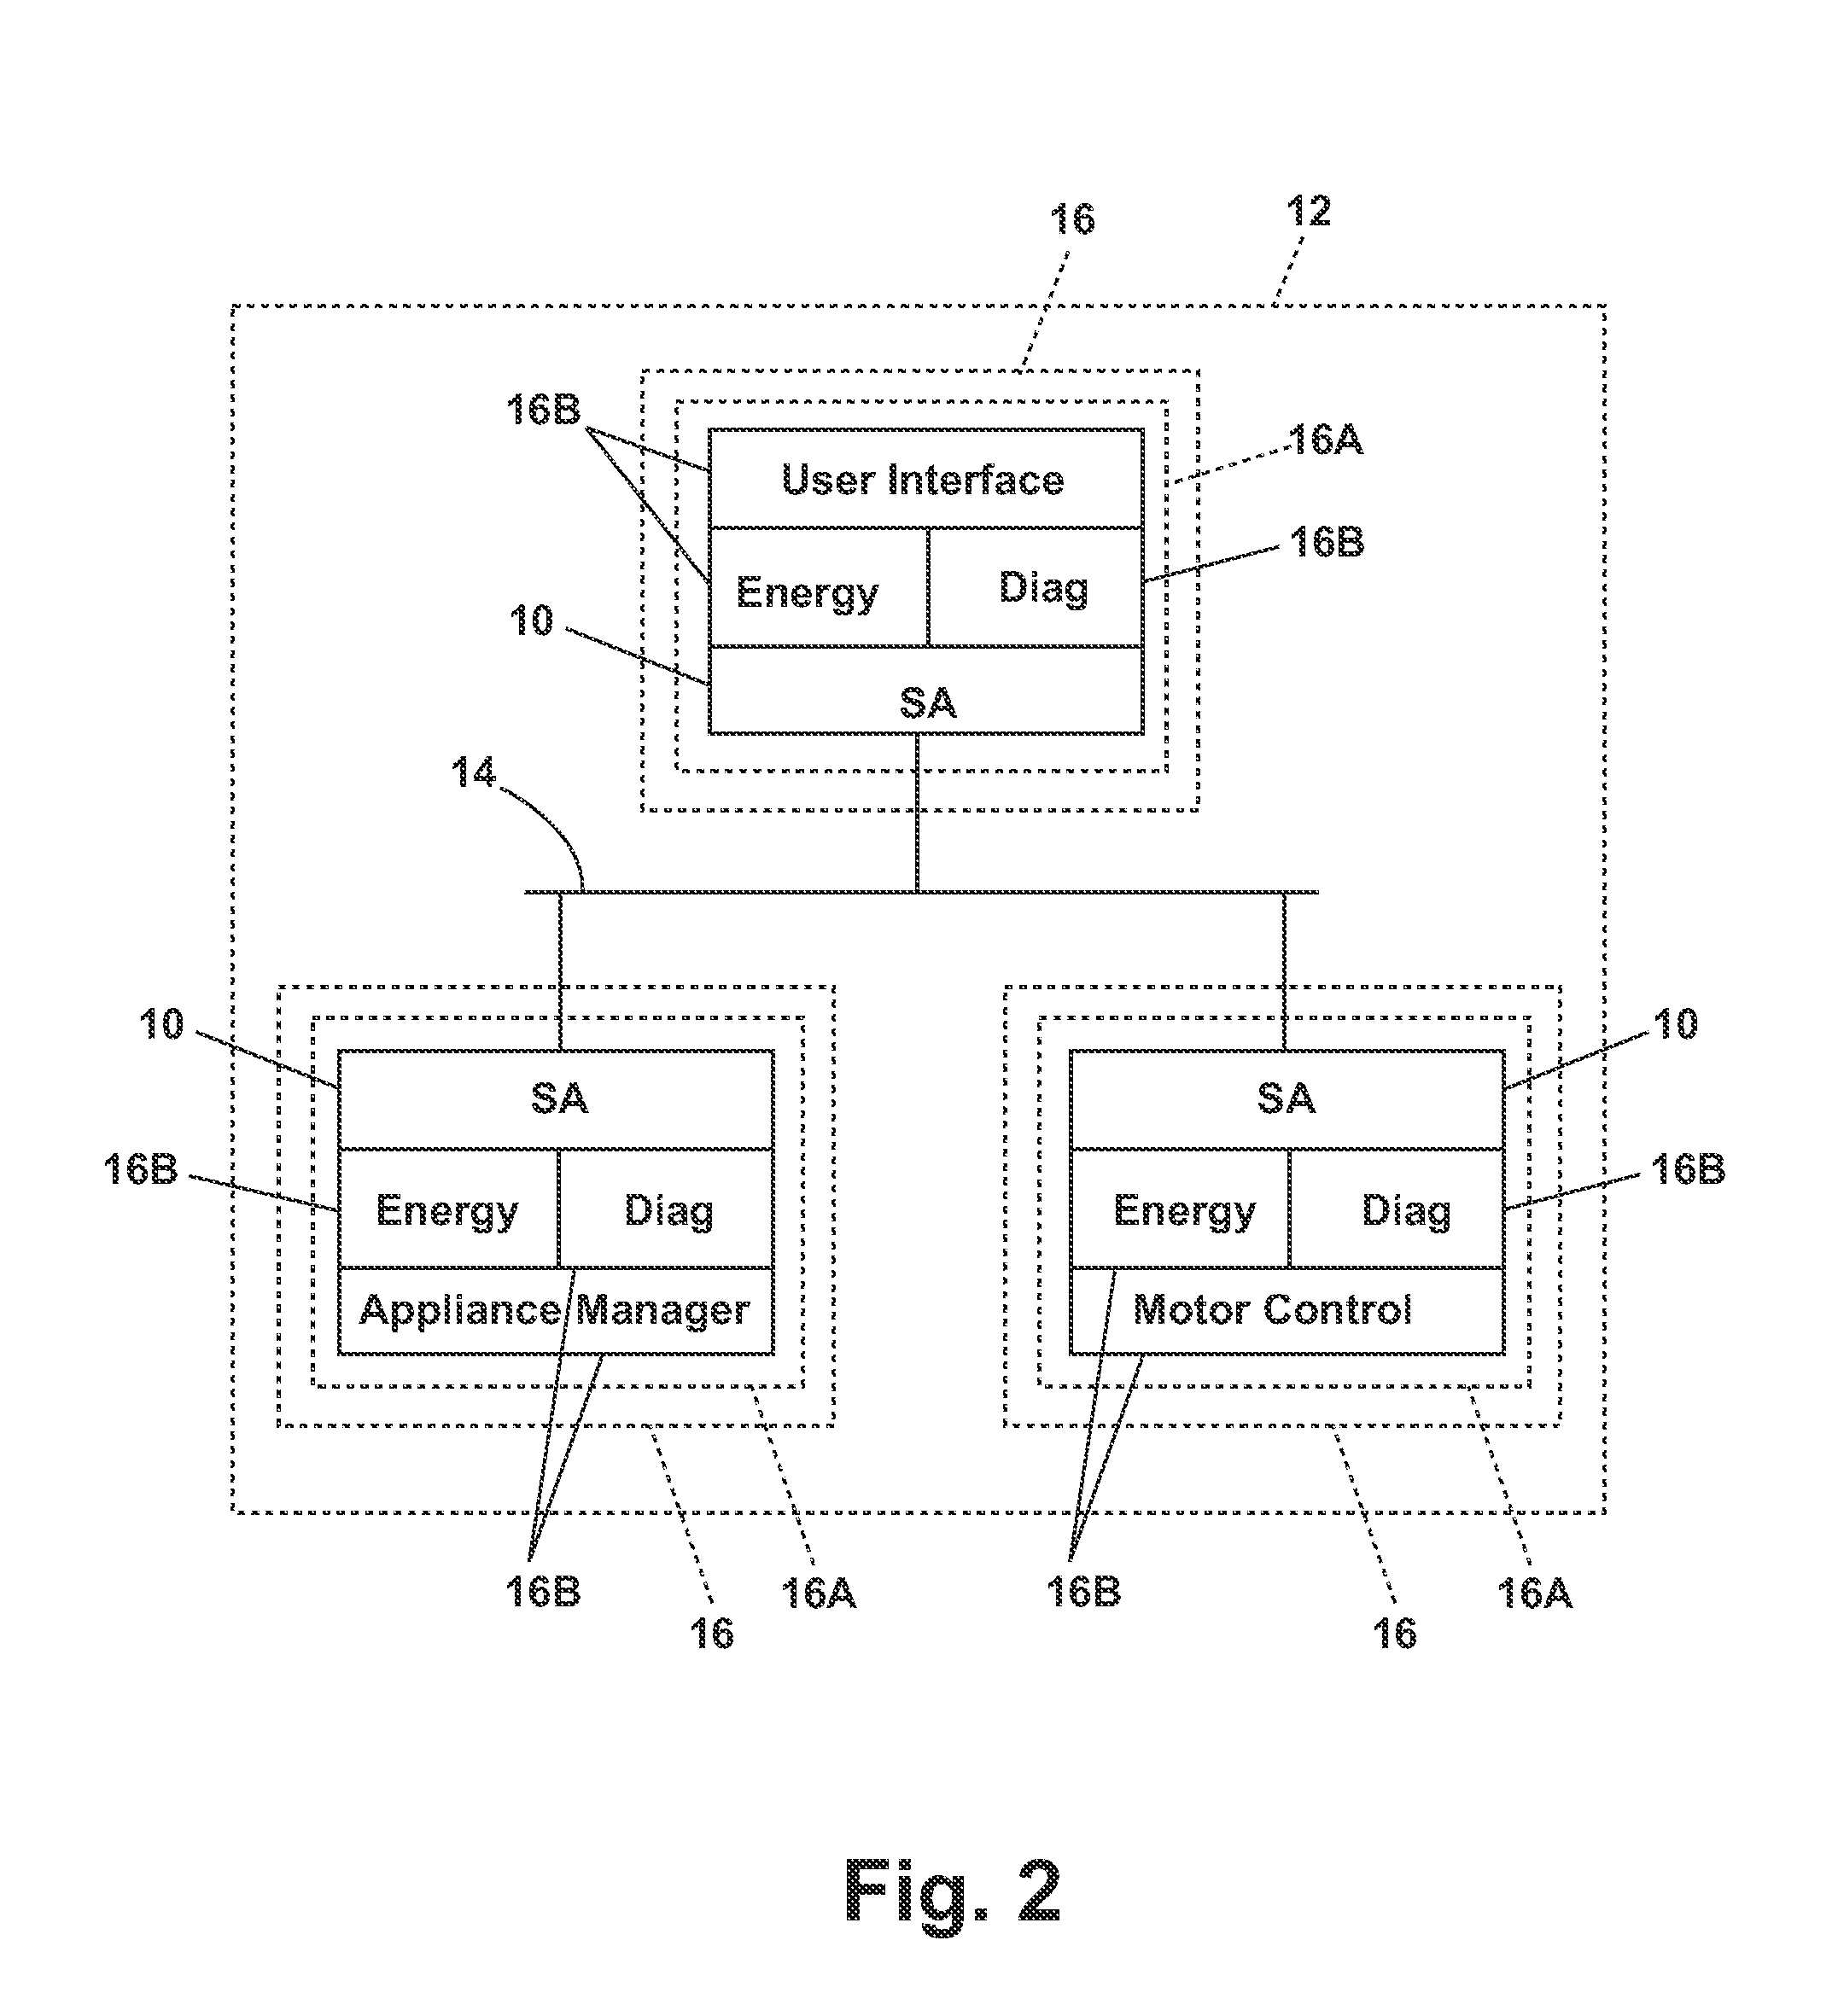 Software architecture system and method for operating an appliance exposing key press functionality to a network